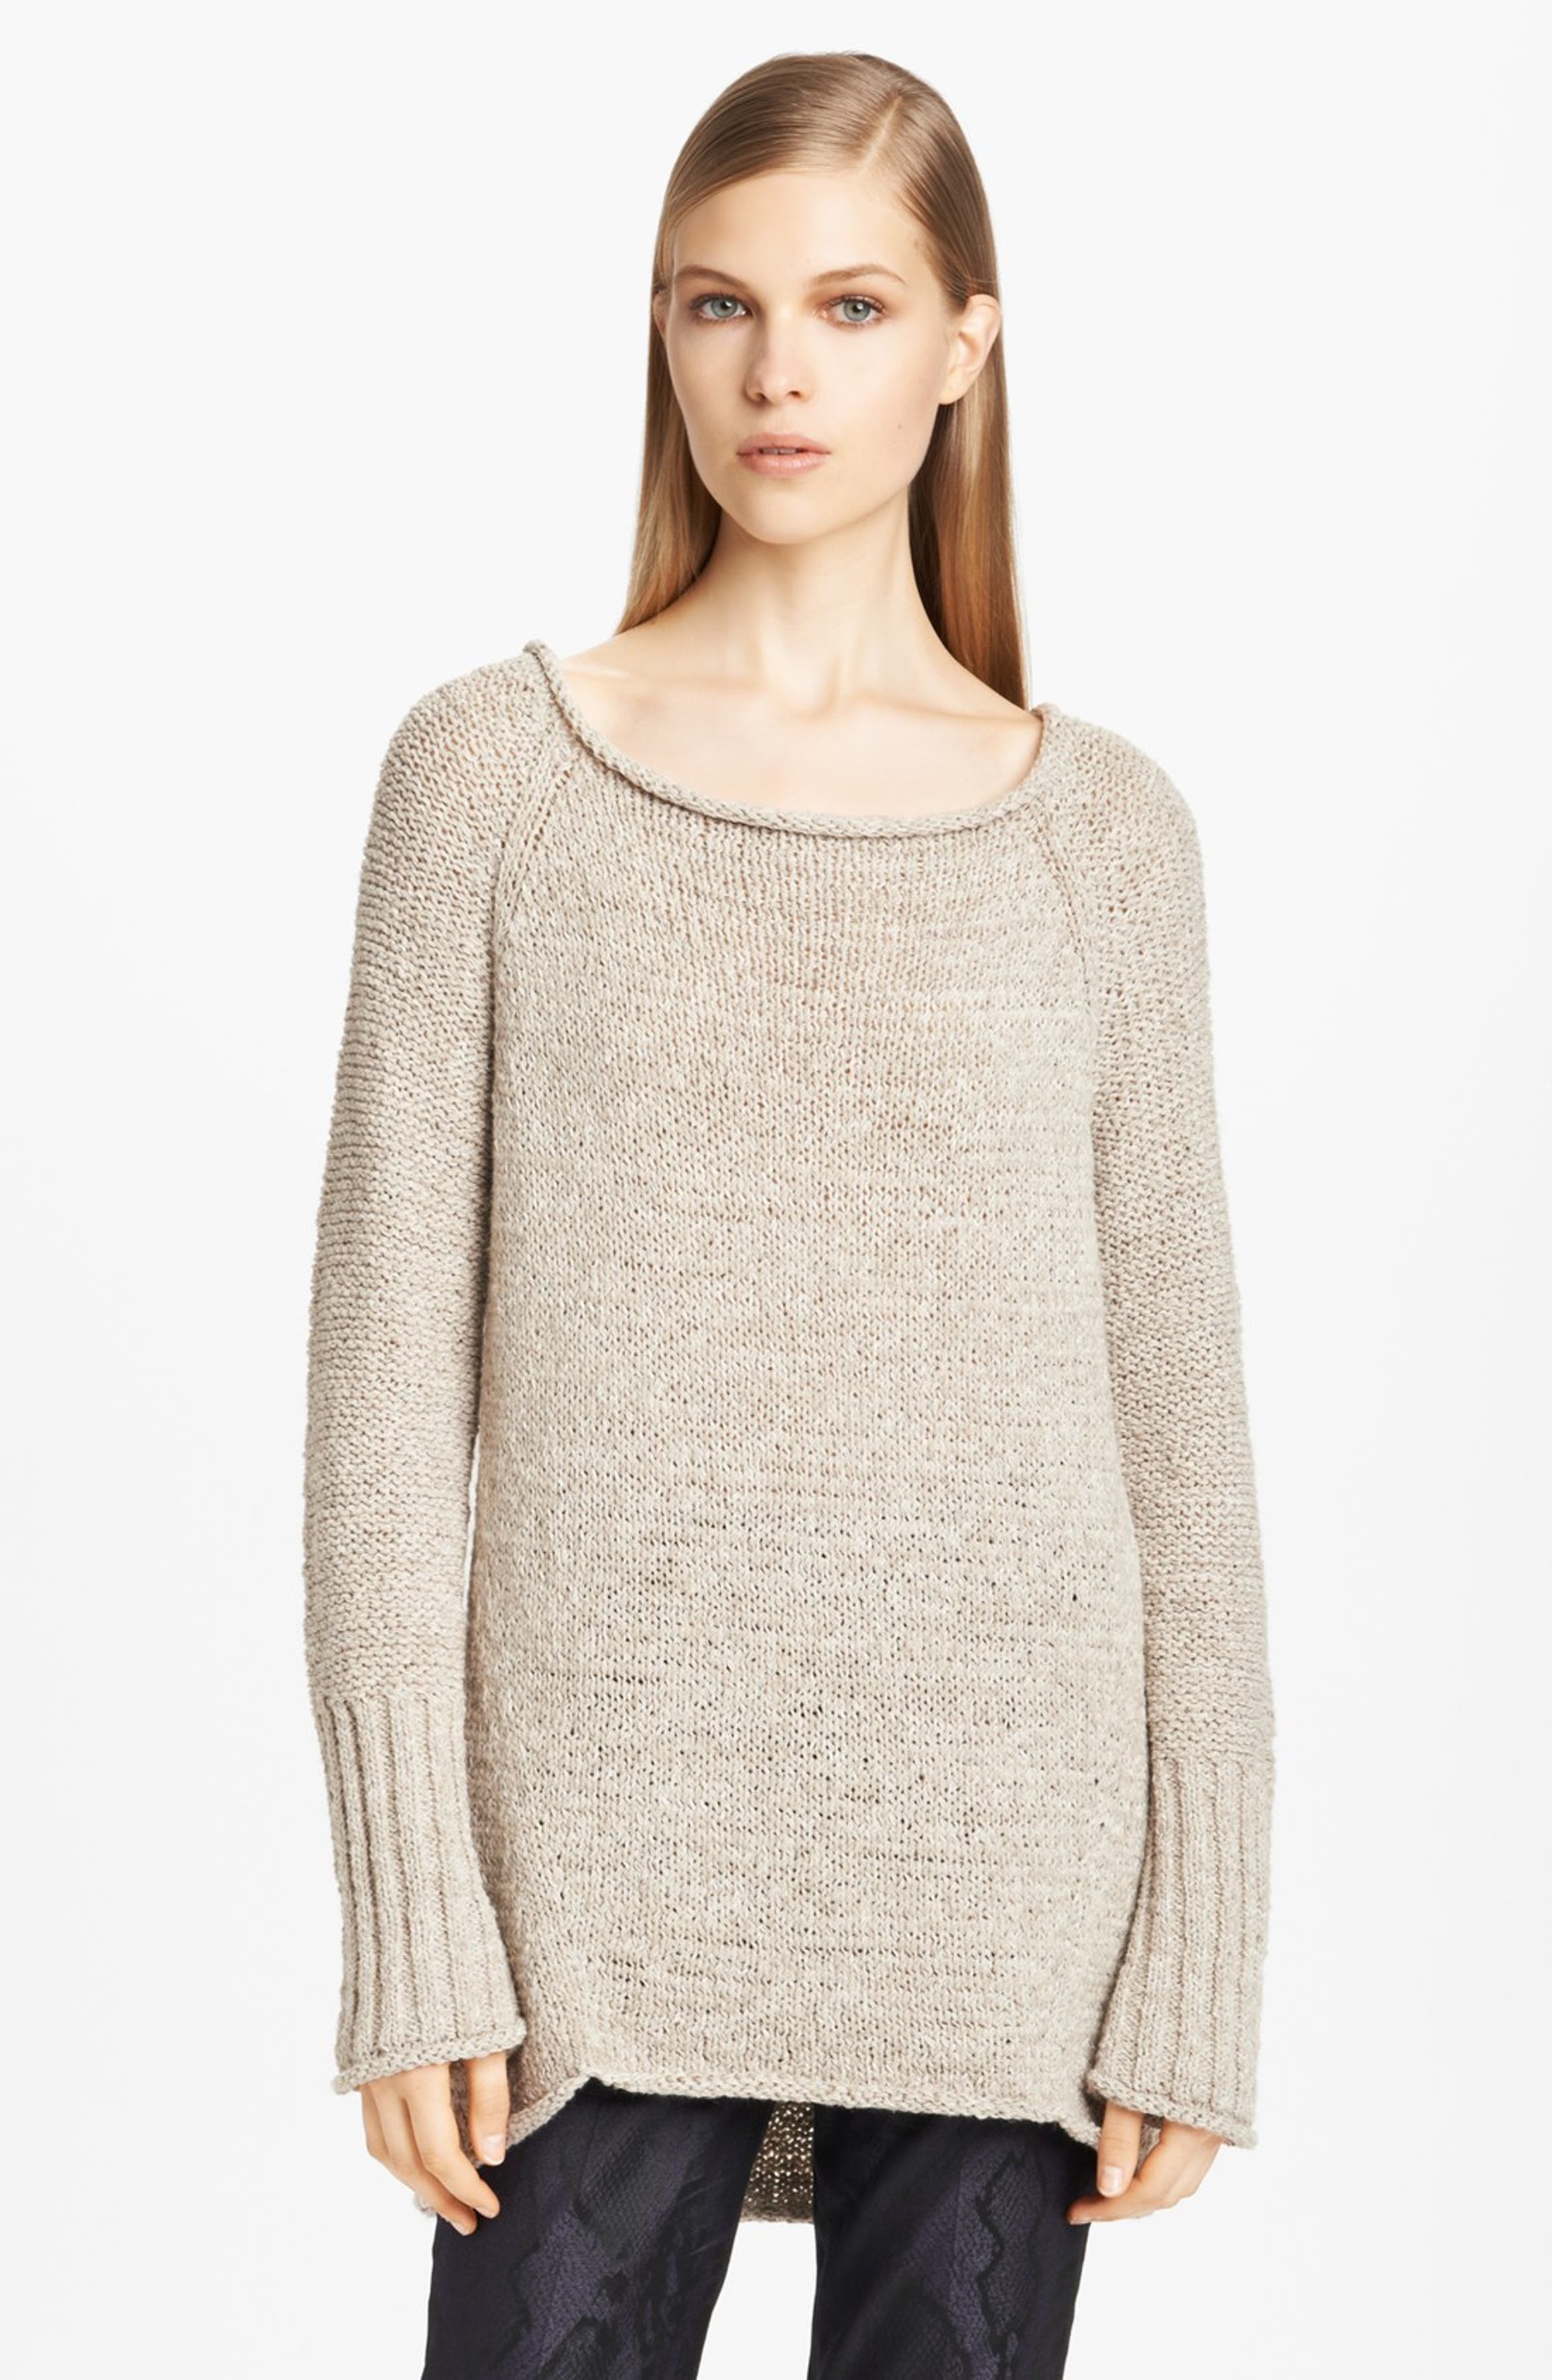 Donna Karan Casual Luxe Knit Sweater | Nordstrom